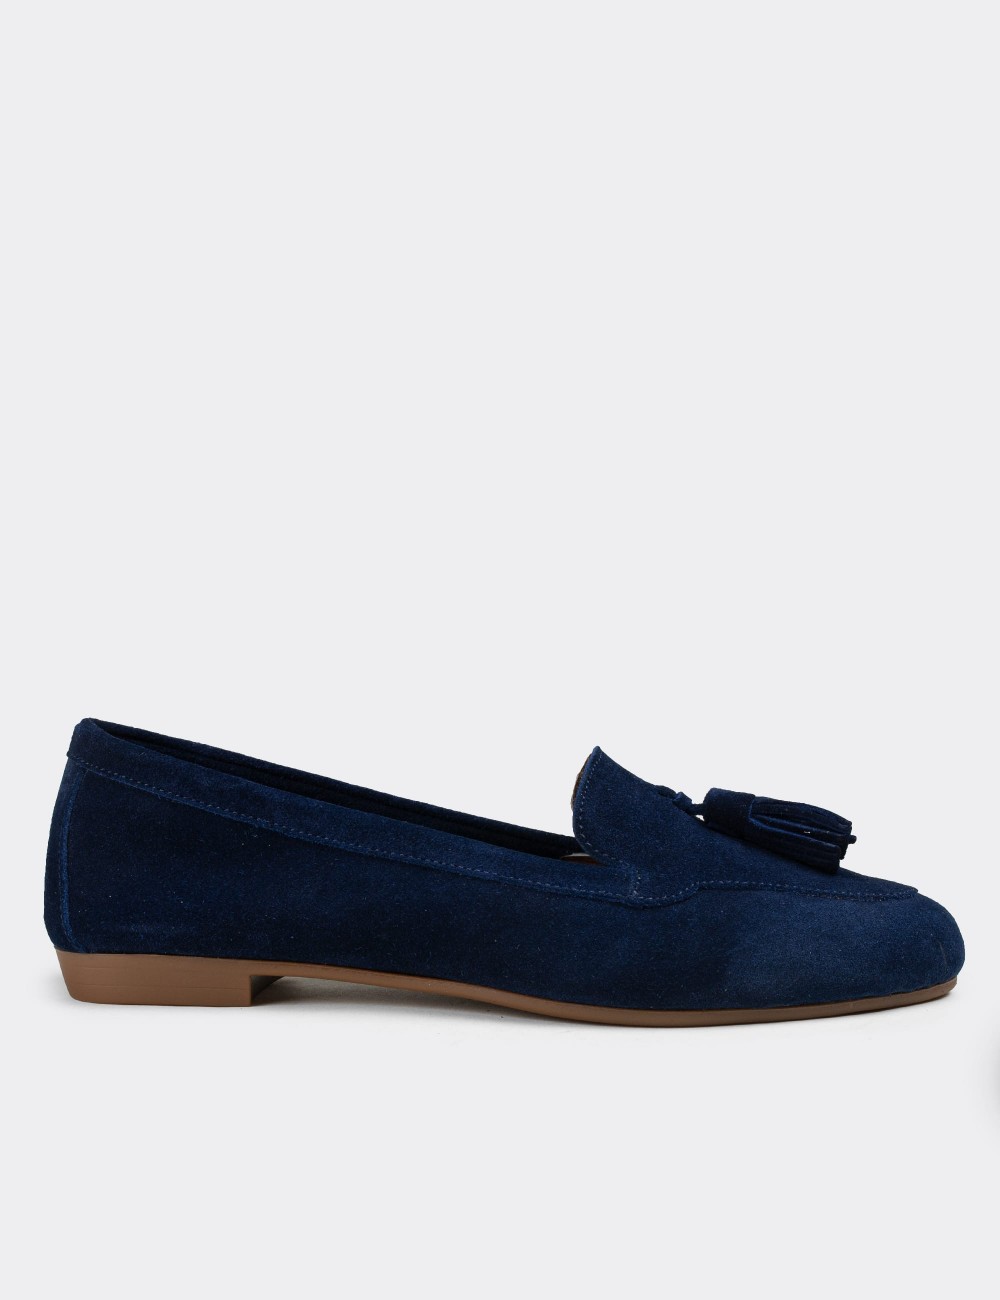 Navy Suede Leather Loafers - E3209ZLCVC02